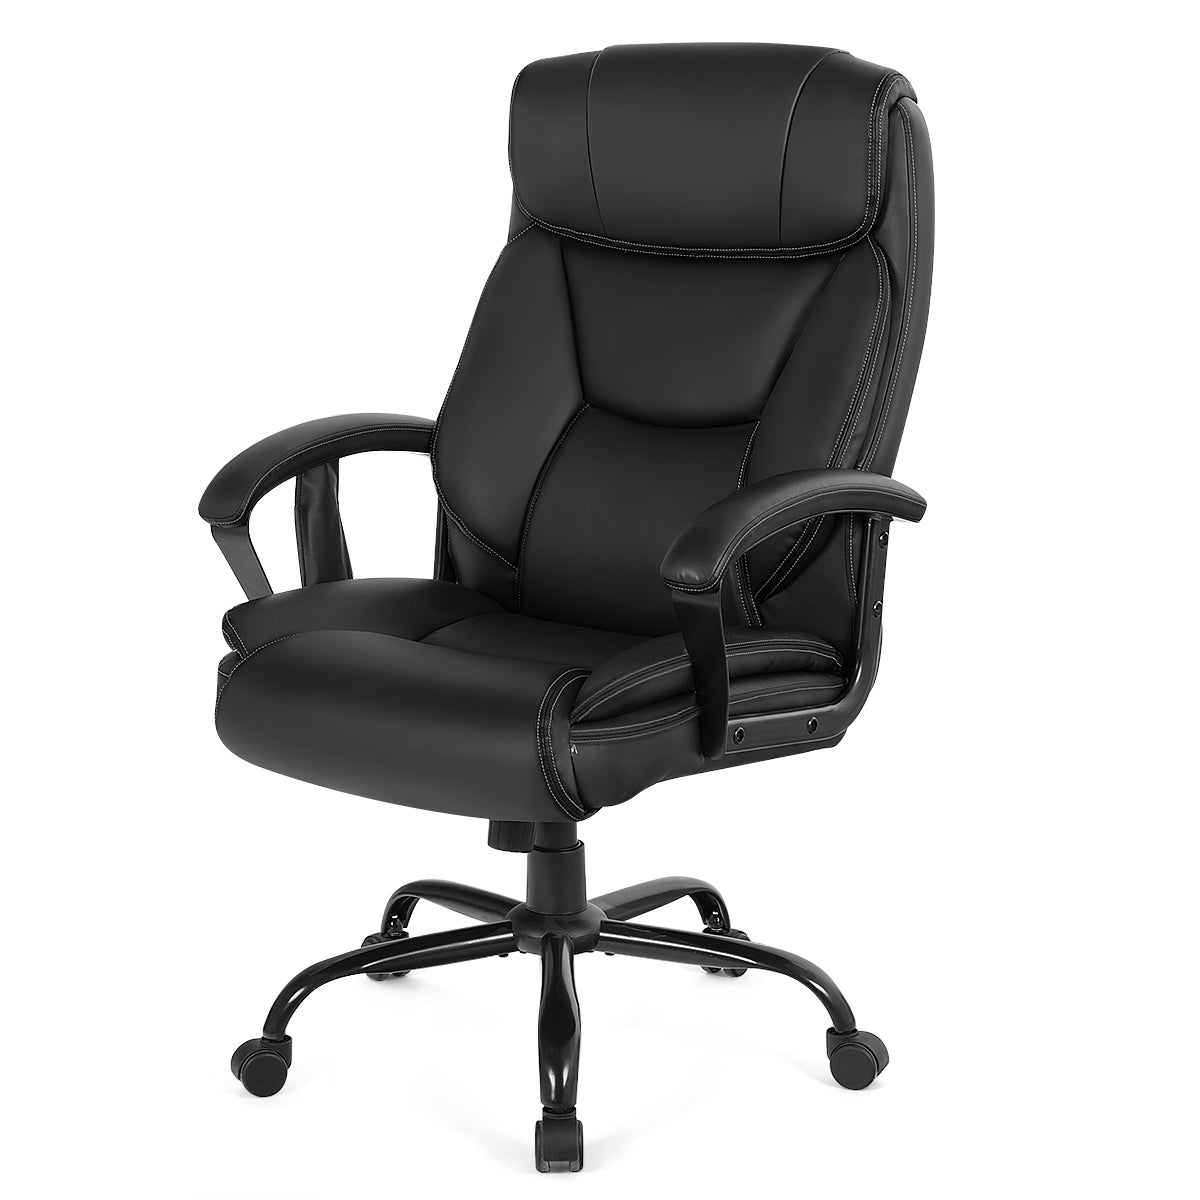 Giantex Executive Office Chair, Big and Tall Massage Chair w/ 6 Vibrating Points (Black)